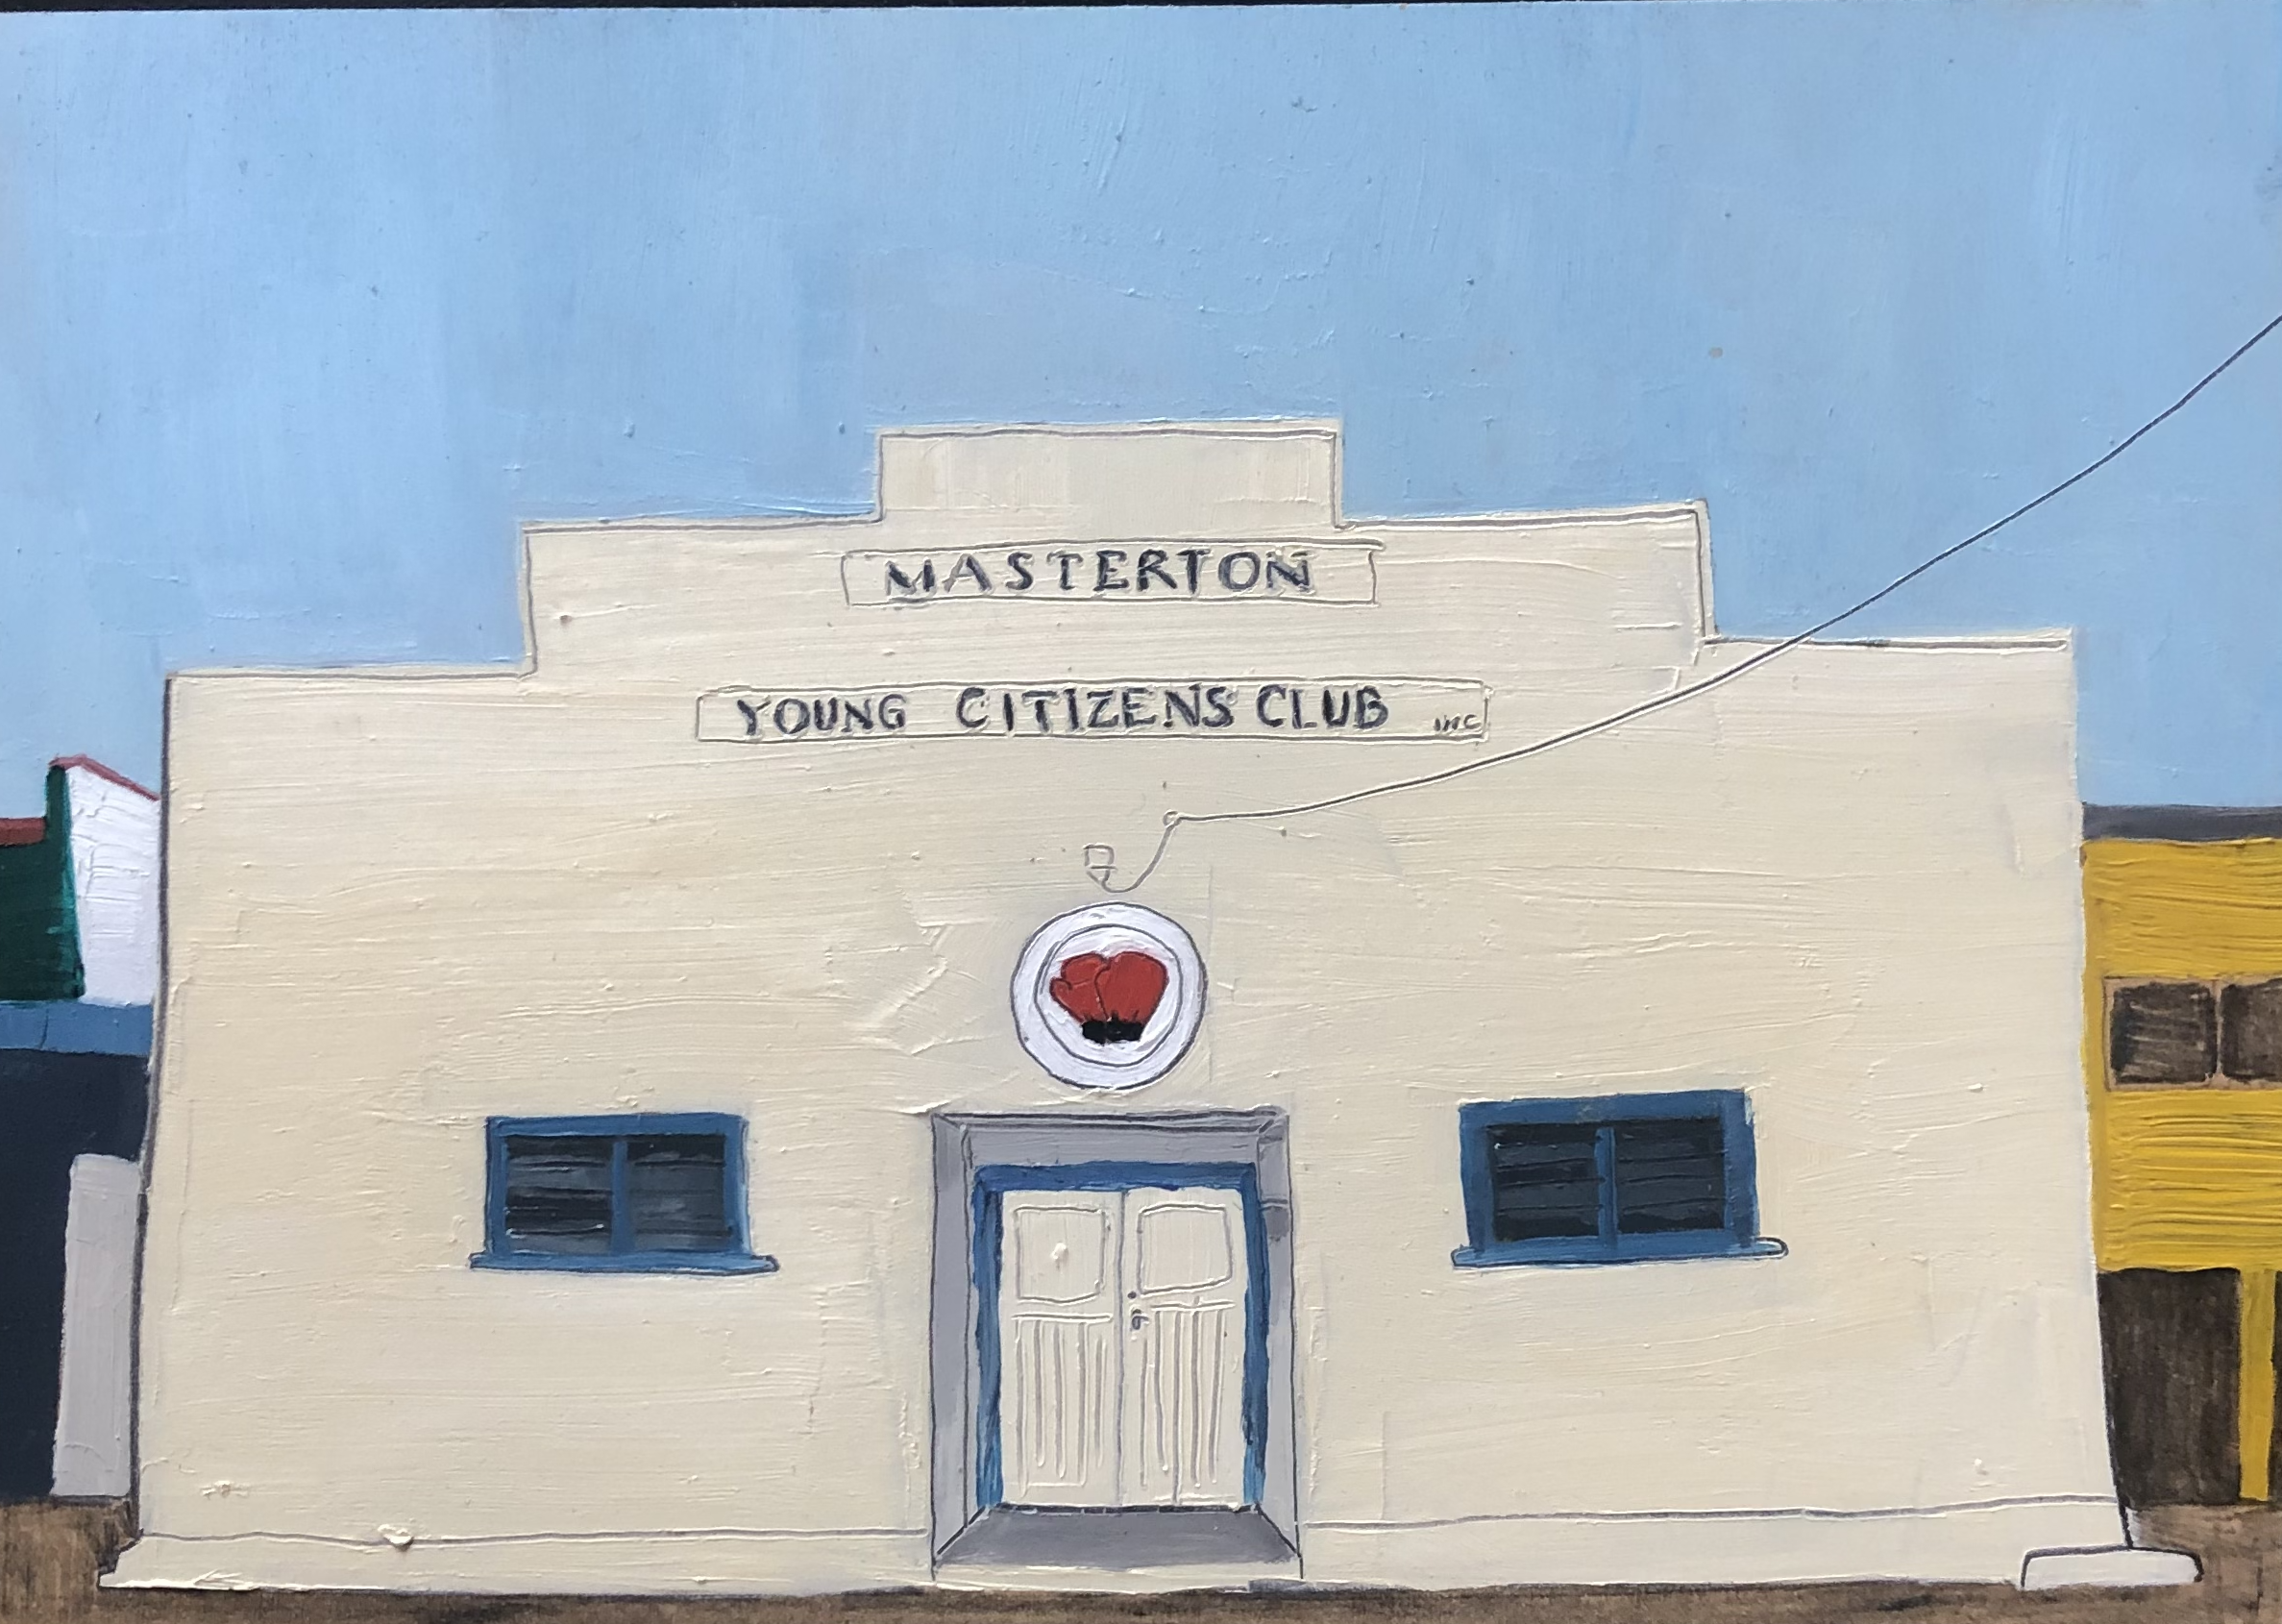 Masterton Young Citizens Club